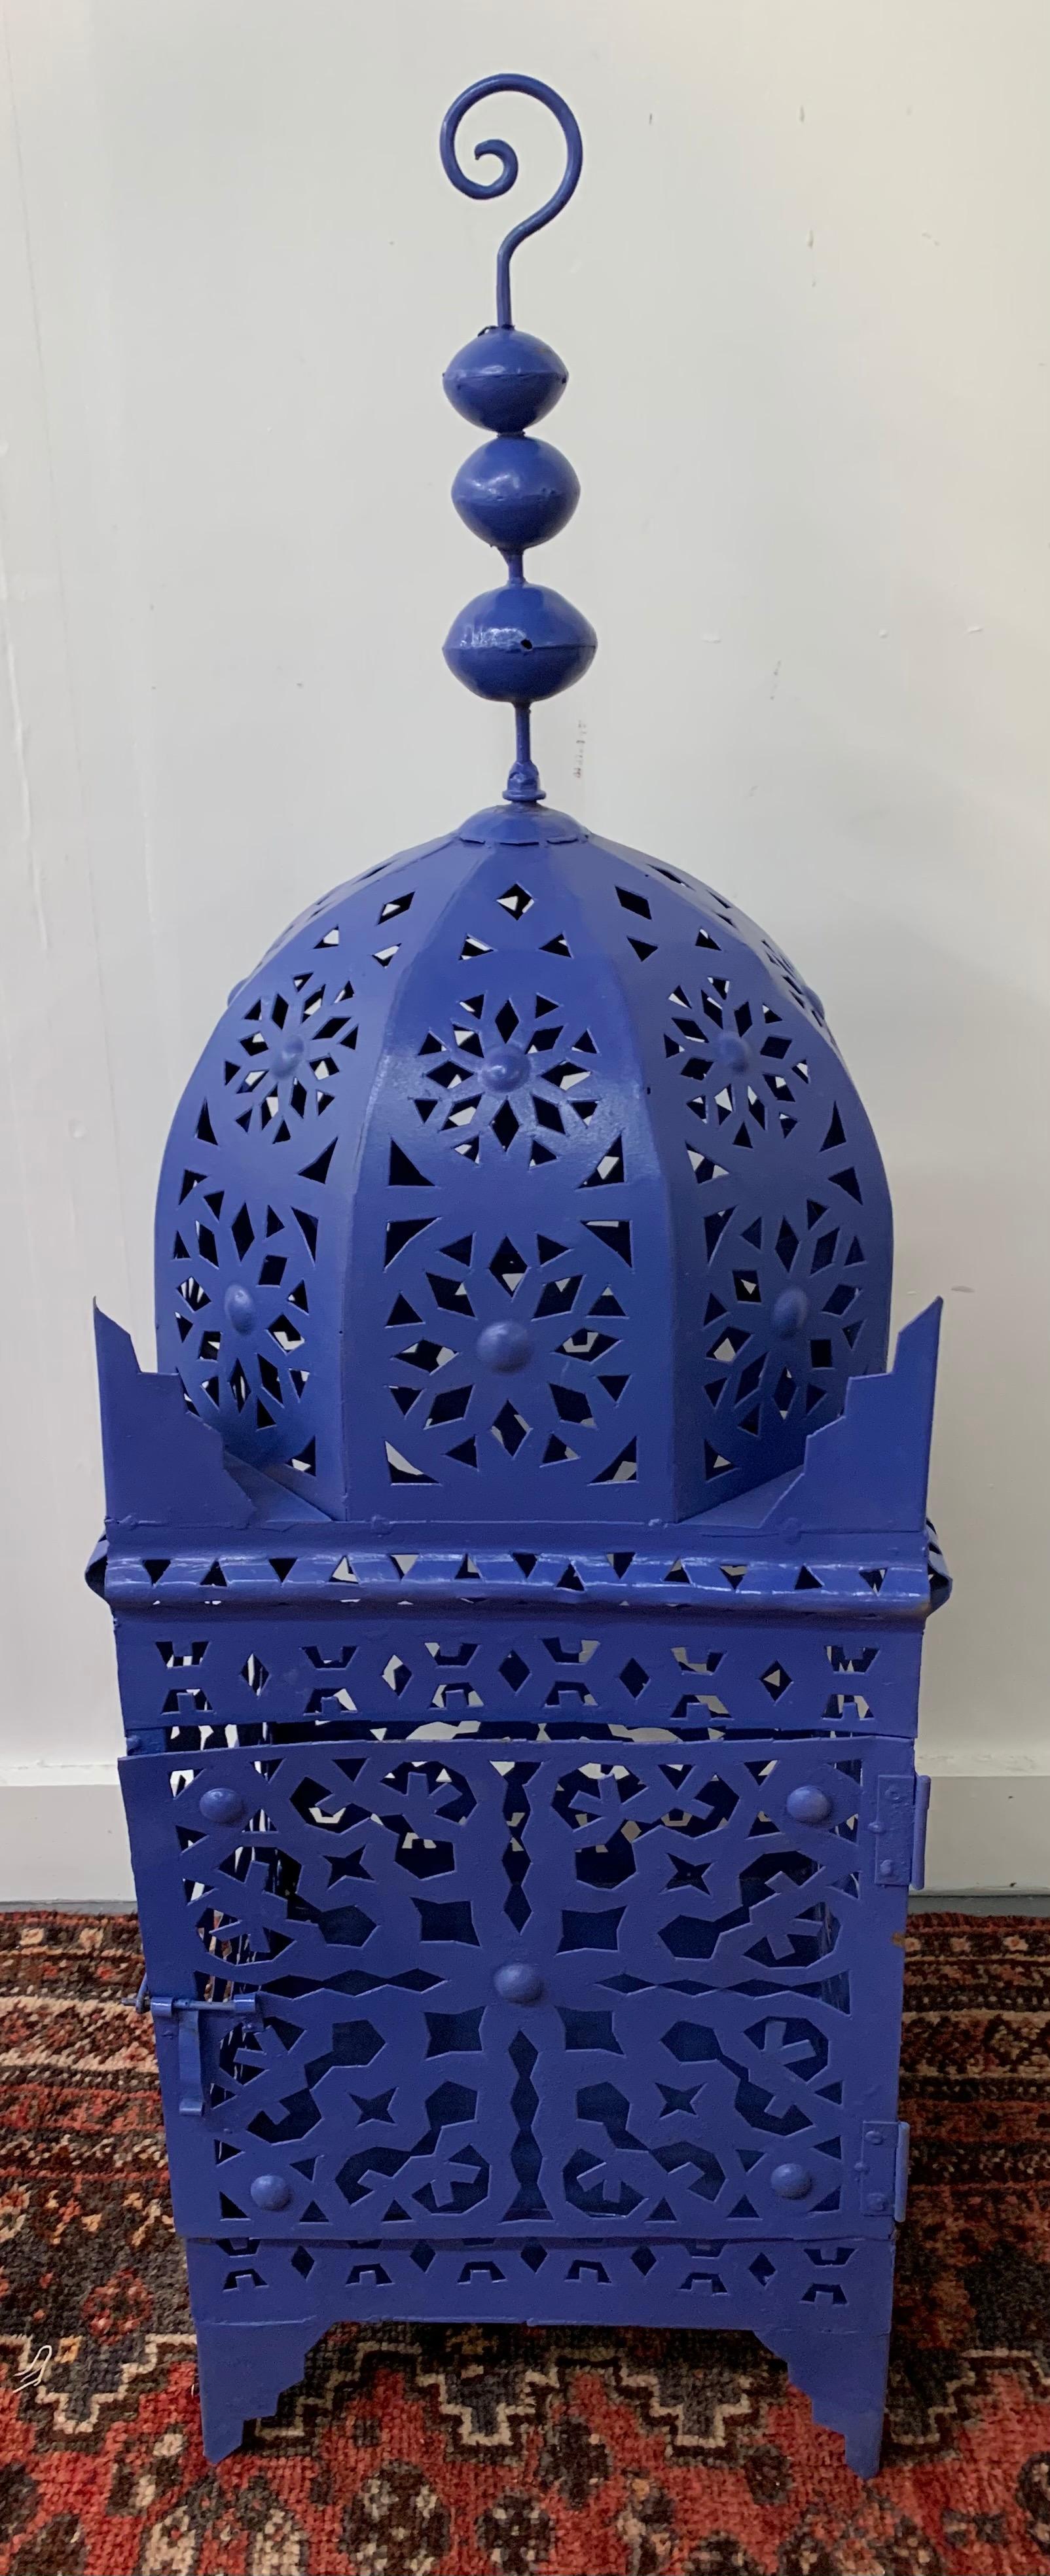 Garden floor lantern or candleholder in blue, a pair

The pair of floor lanterns are hand carved of metal painted in blue Majorelle inspired by Yves Saint Laurent Majorelle garden. Each lantern features a beautiful intricate design to emit soft